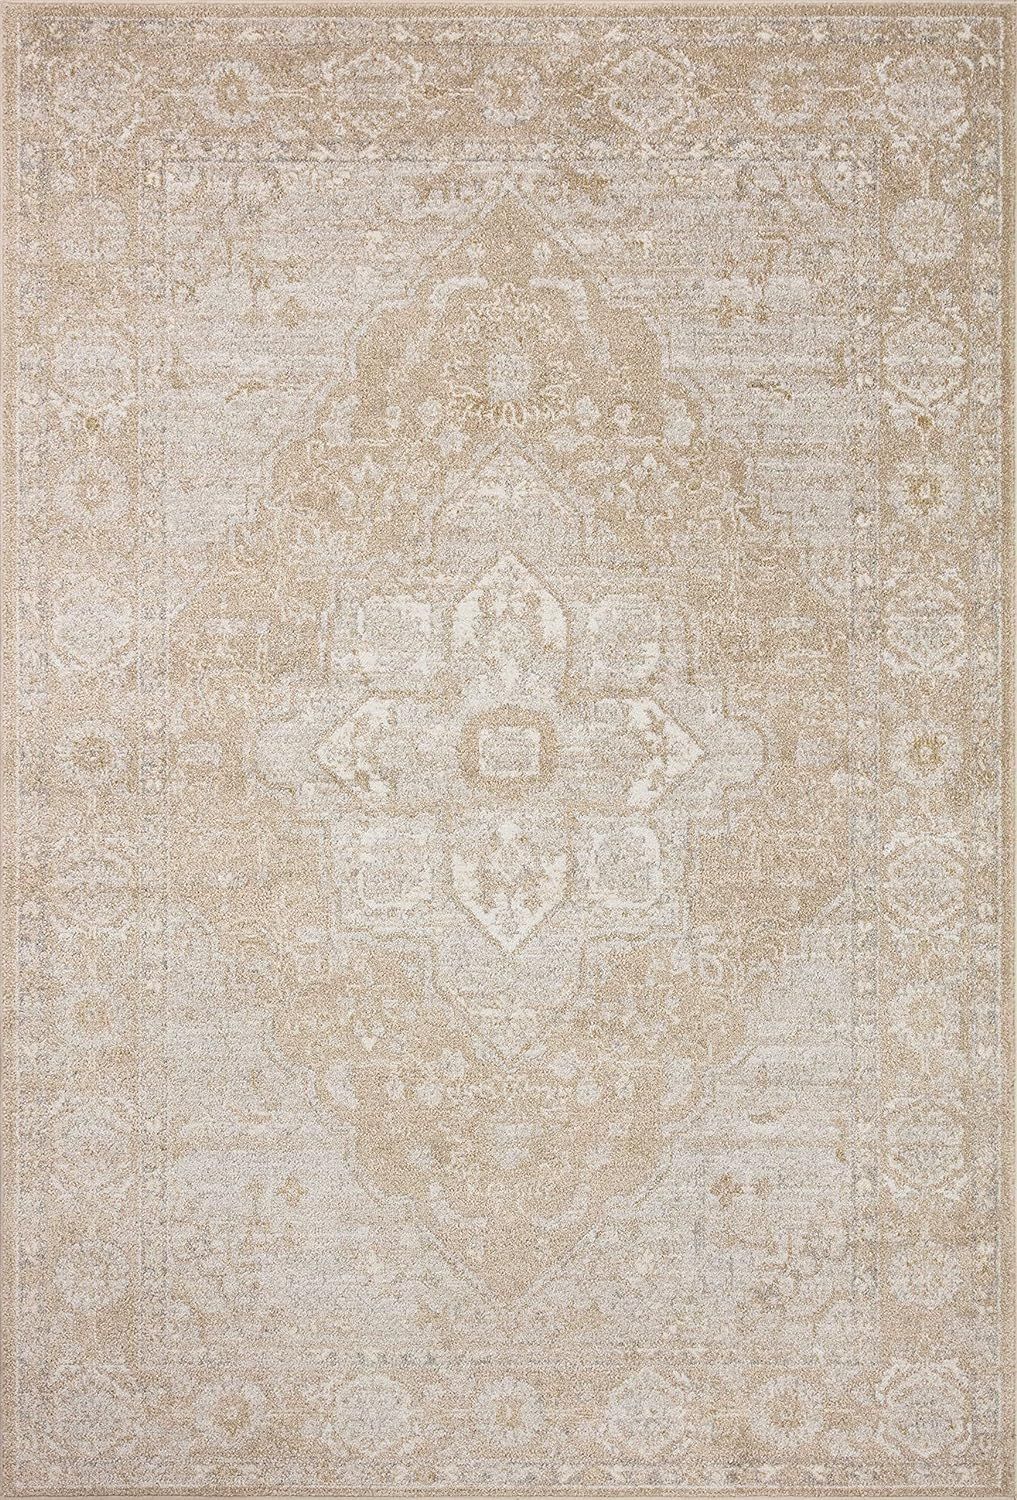 Loloi II Odette Collection ODT-05 Beige/Silver, Traditional 5'-3" x 7'-9" Area Rug | Amazon (US)